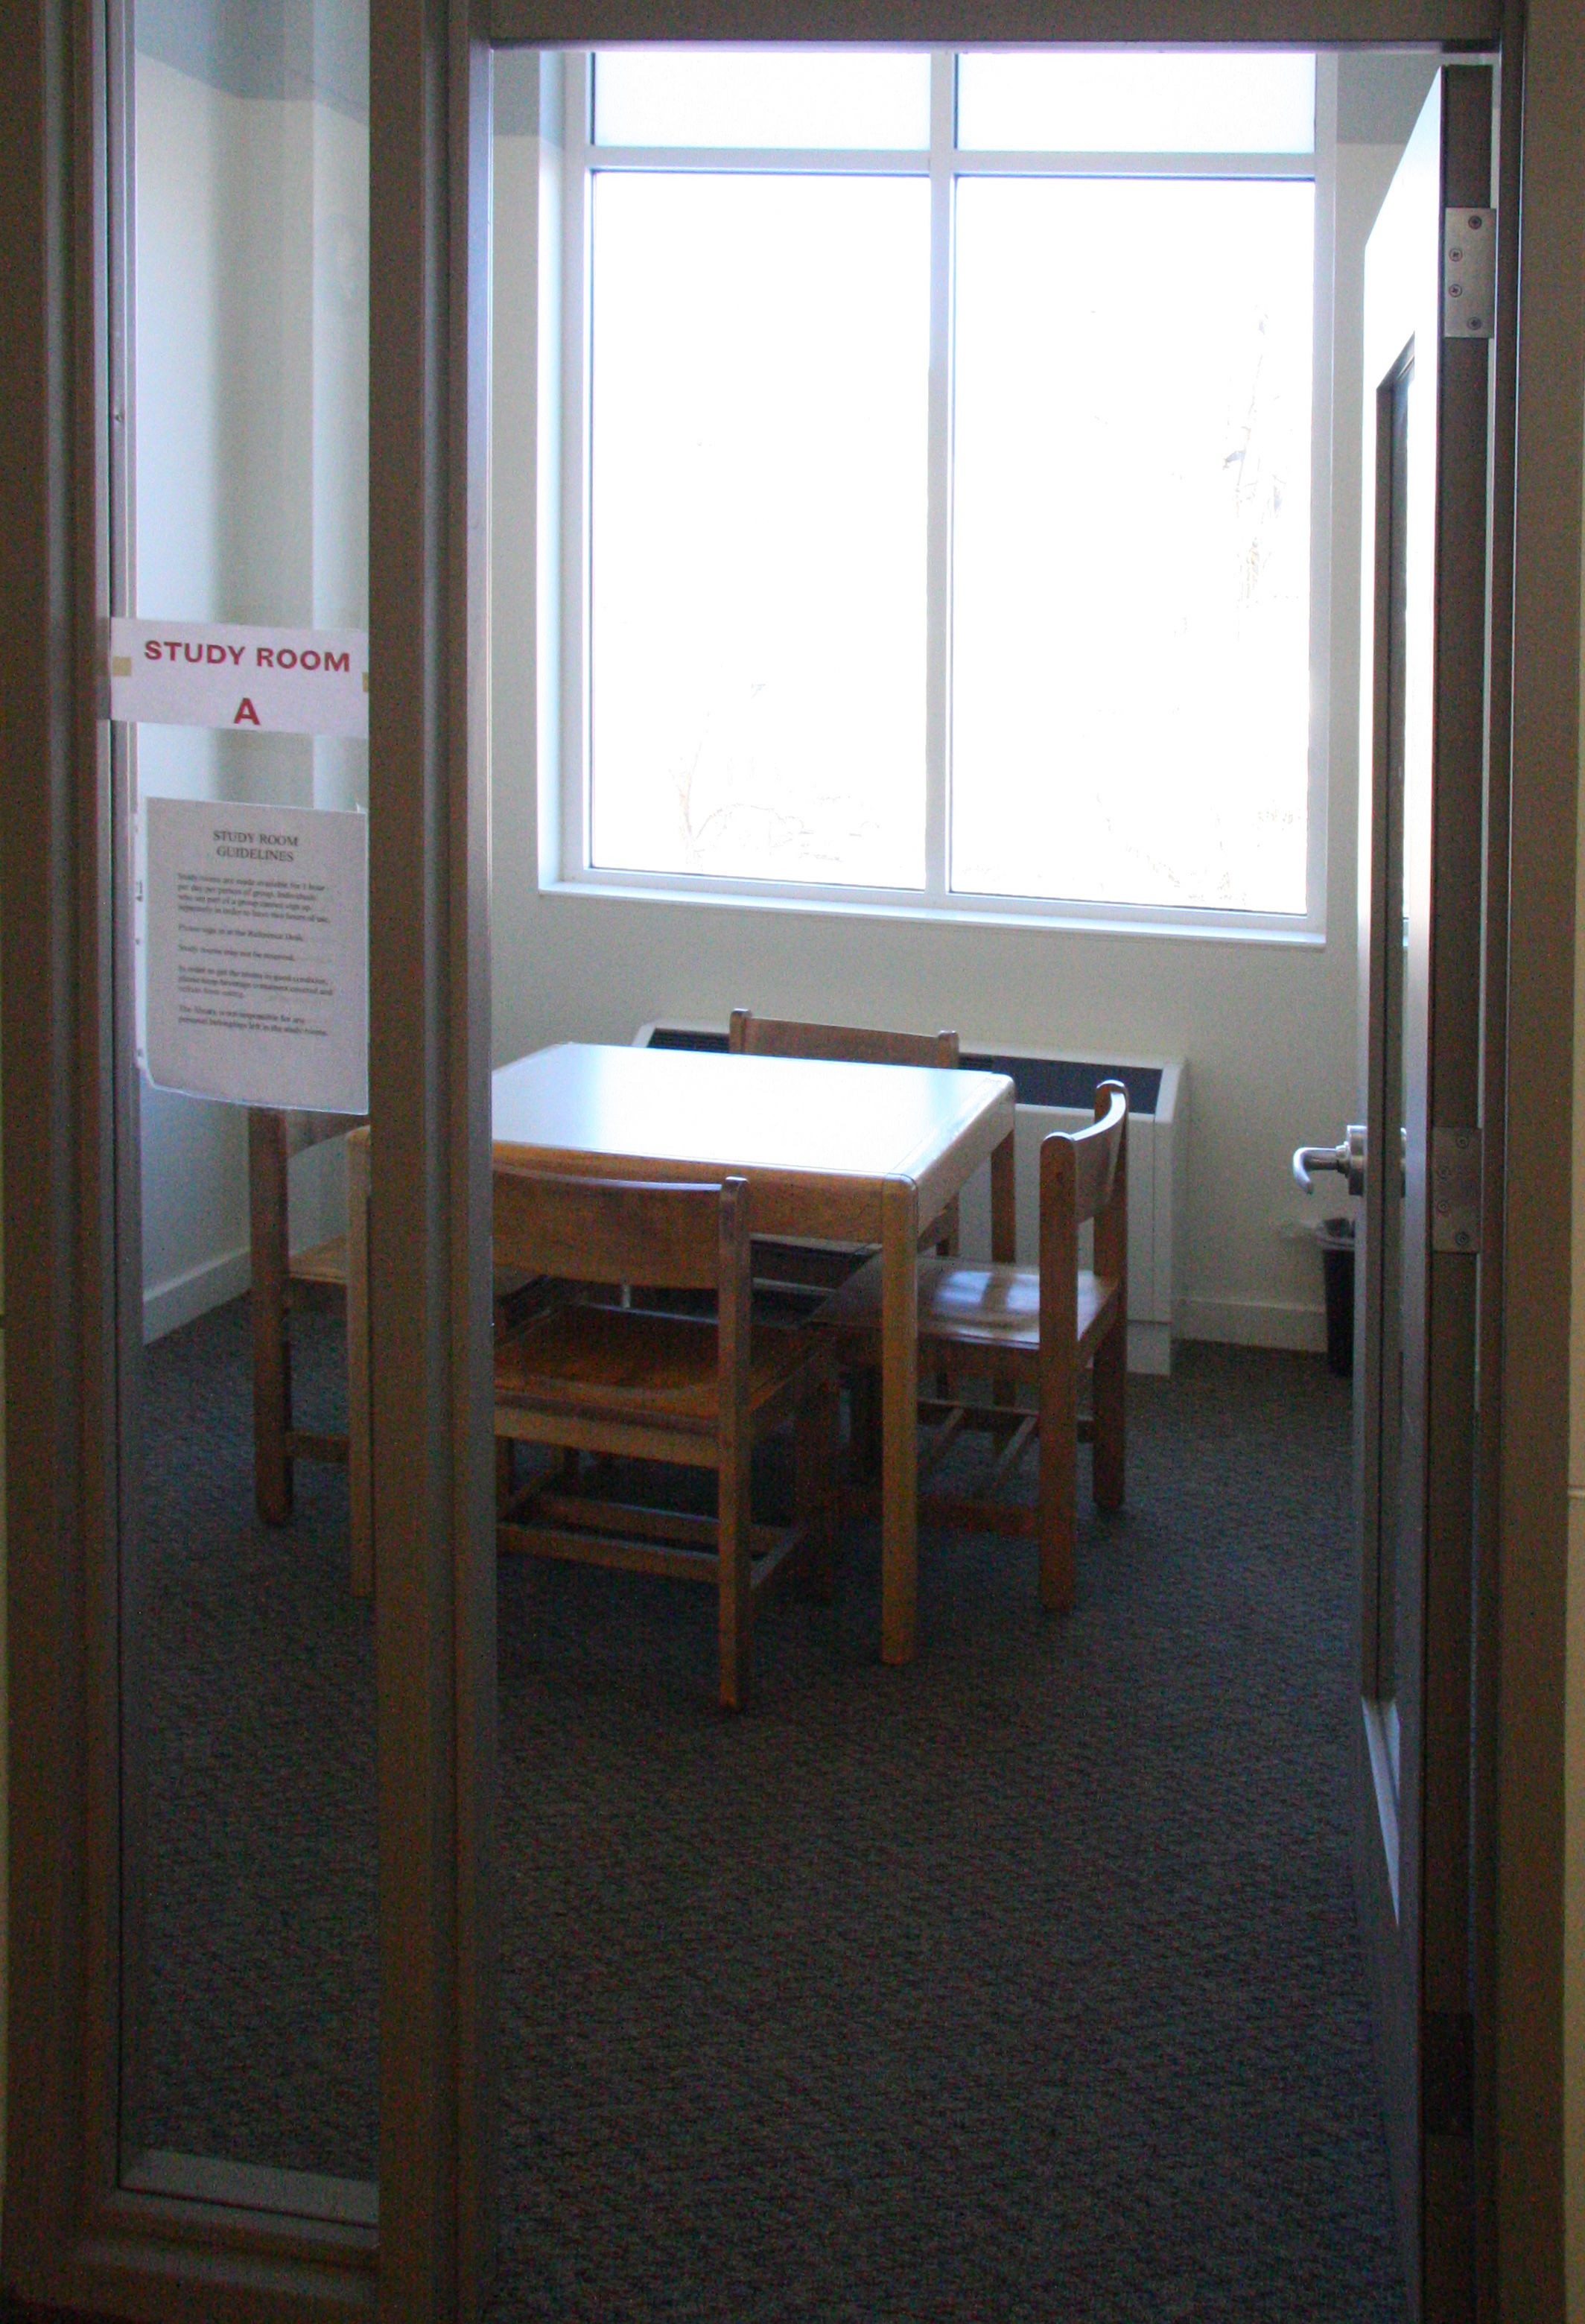 The Mount Kisco Public Library Study Room